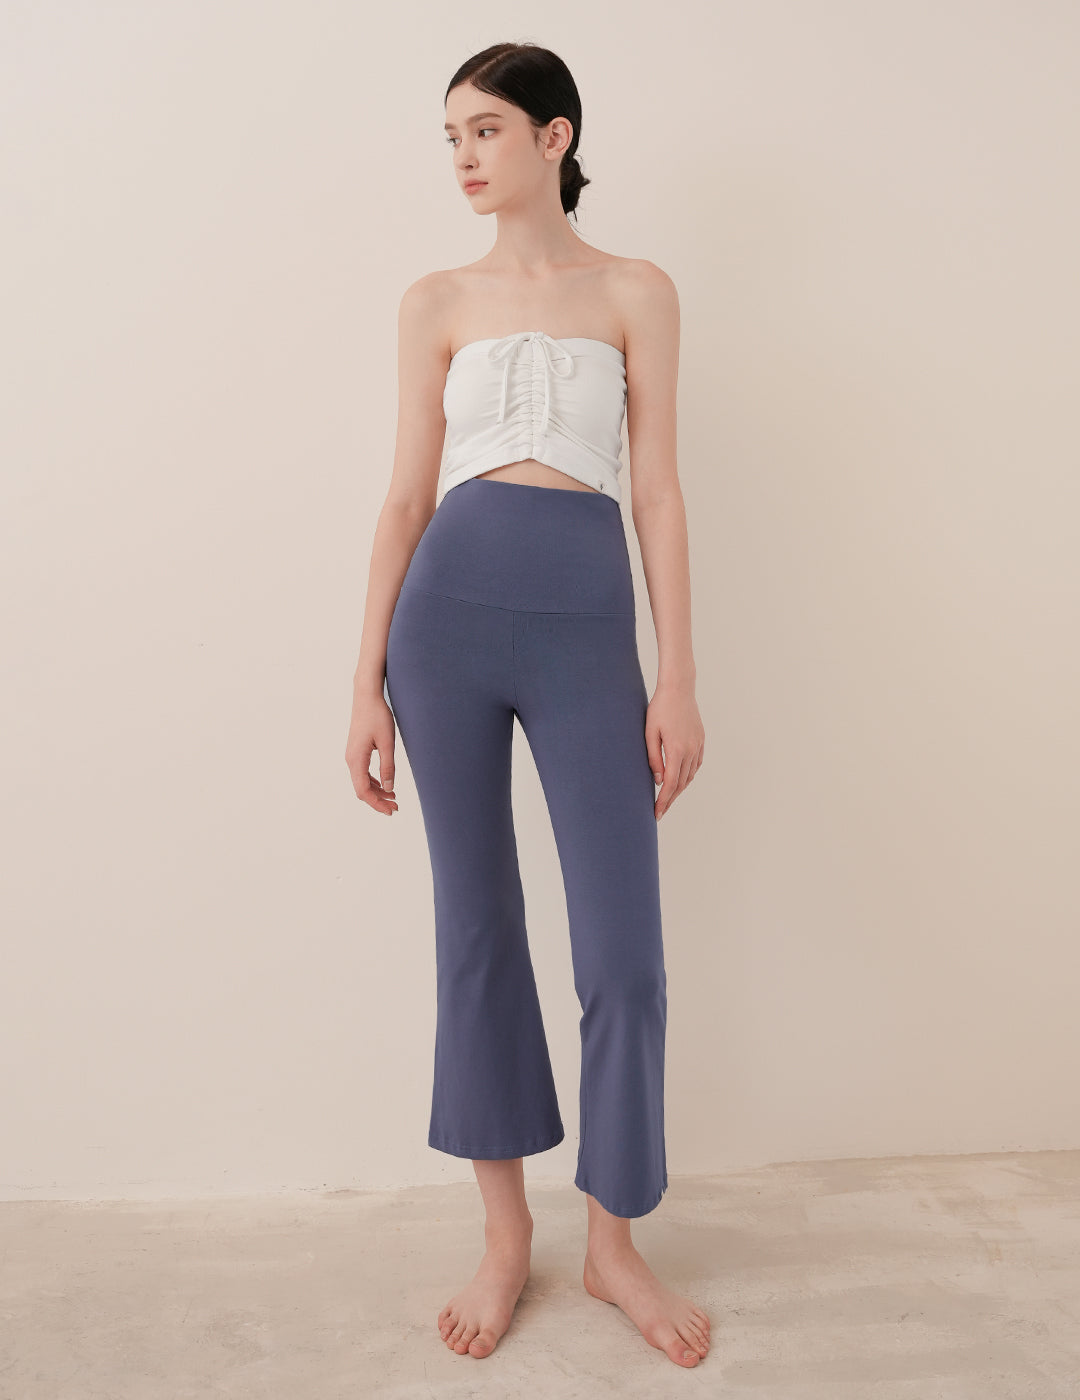 CONCHWEAR Mantra Flare Pants (3 Colours)